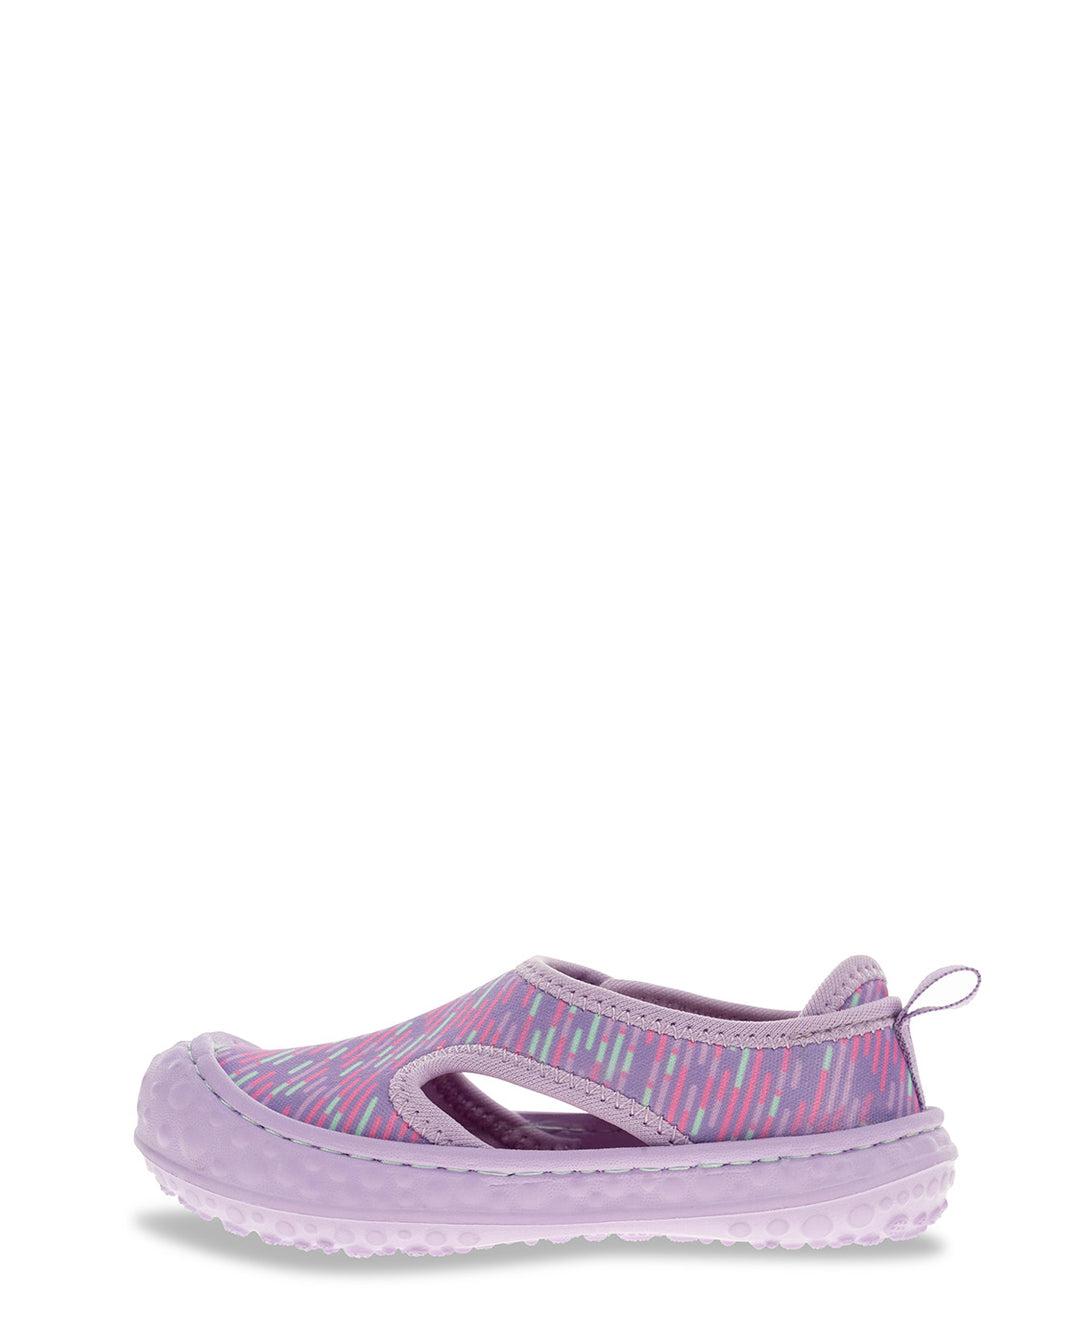 New! Kids Discover Sandal - Lilac